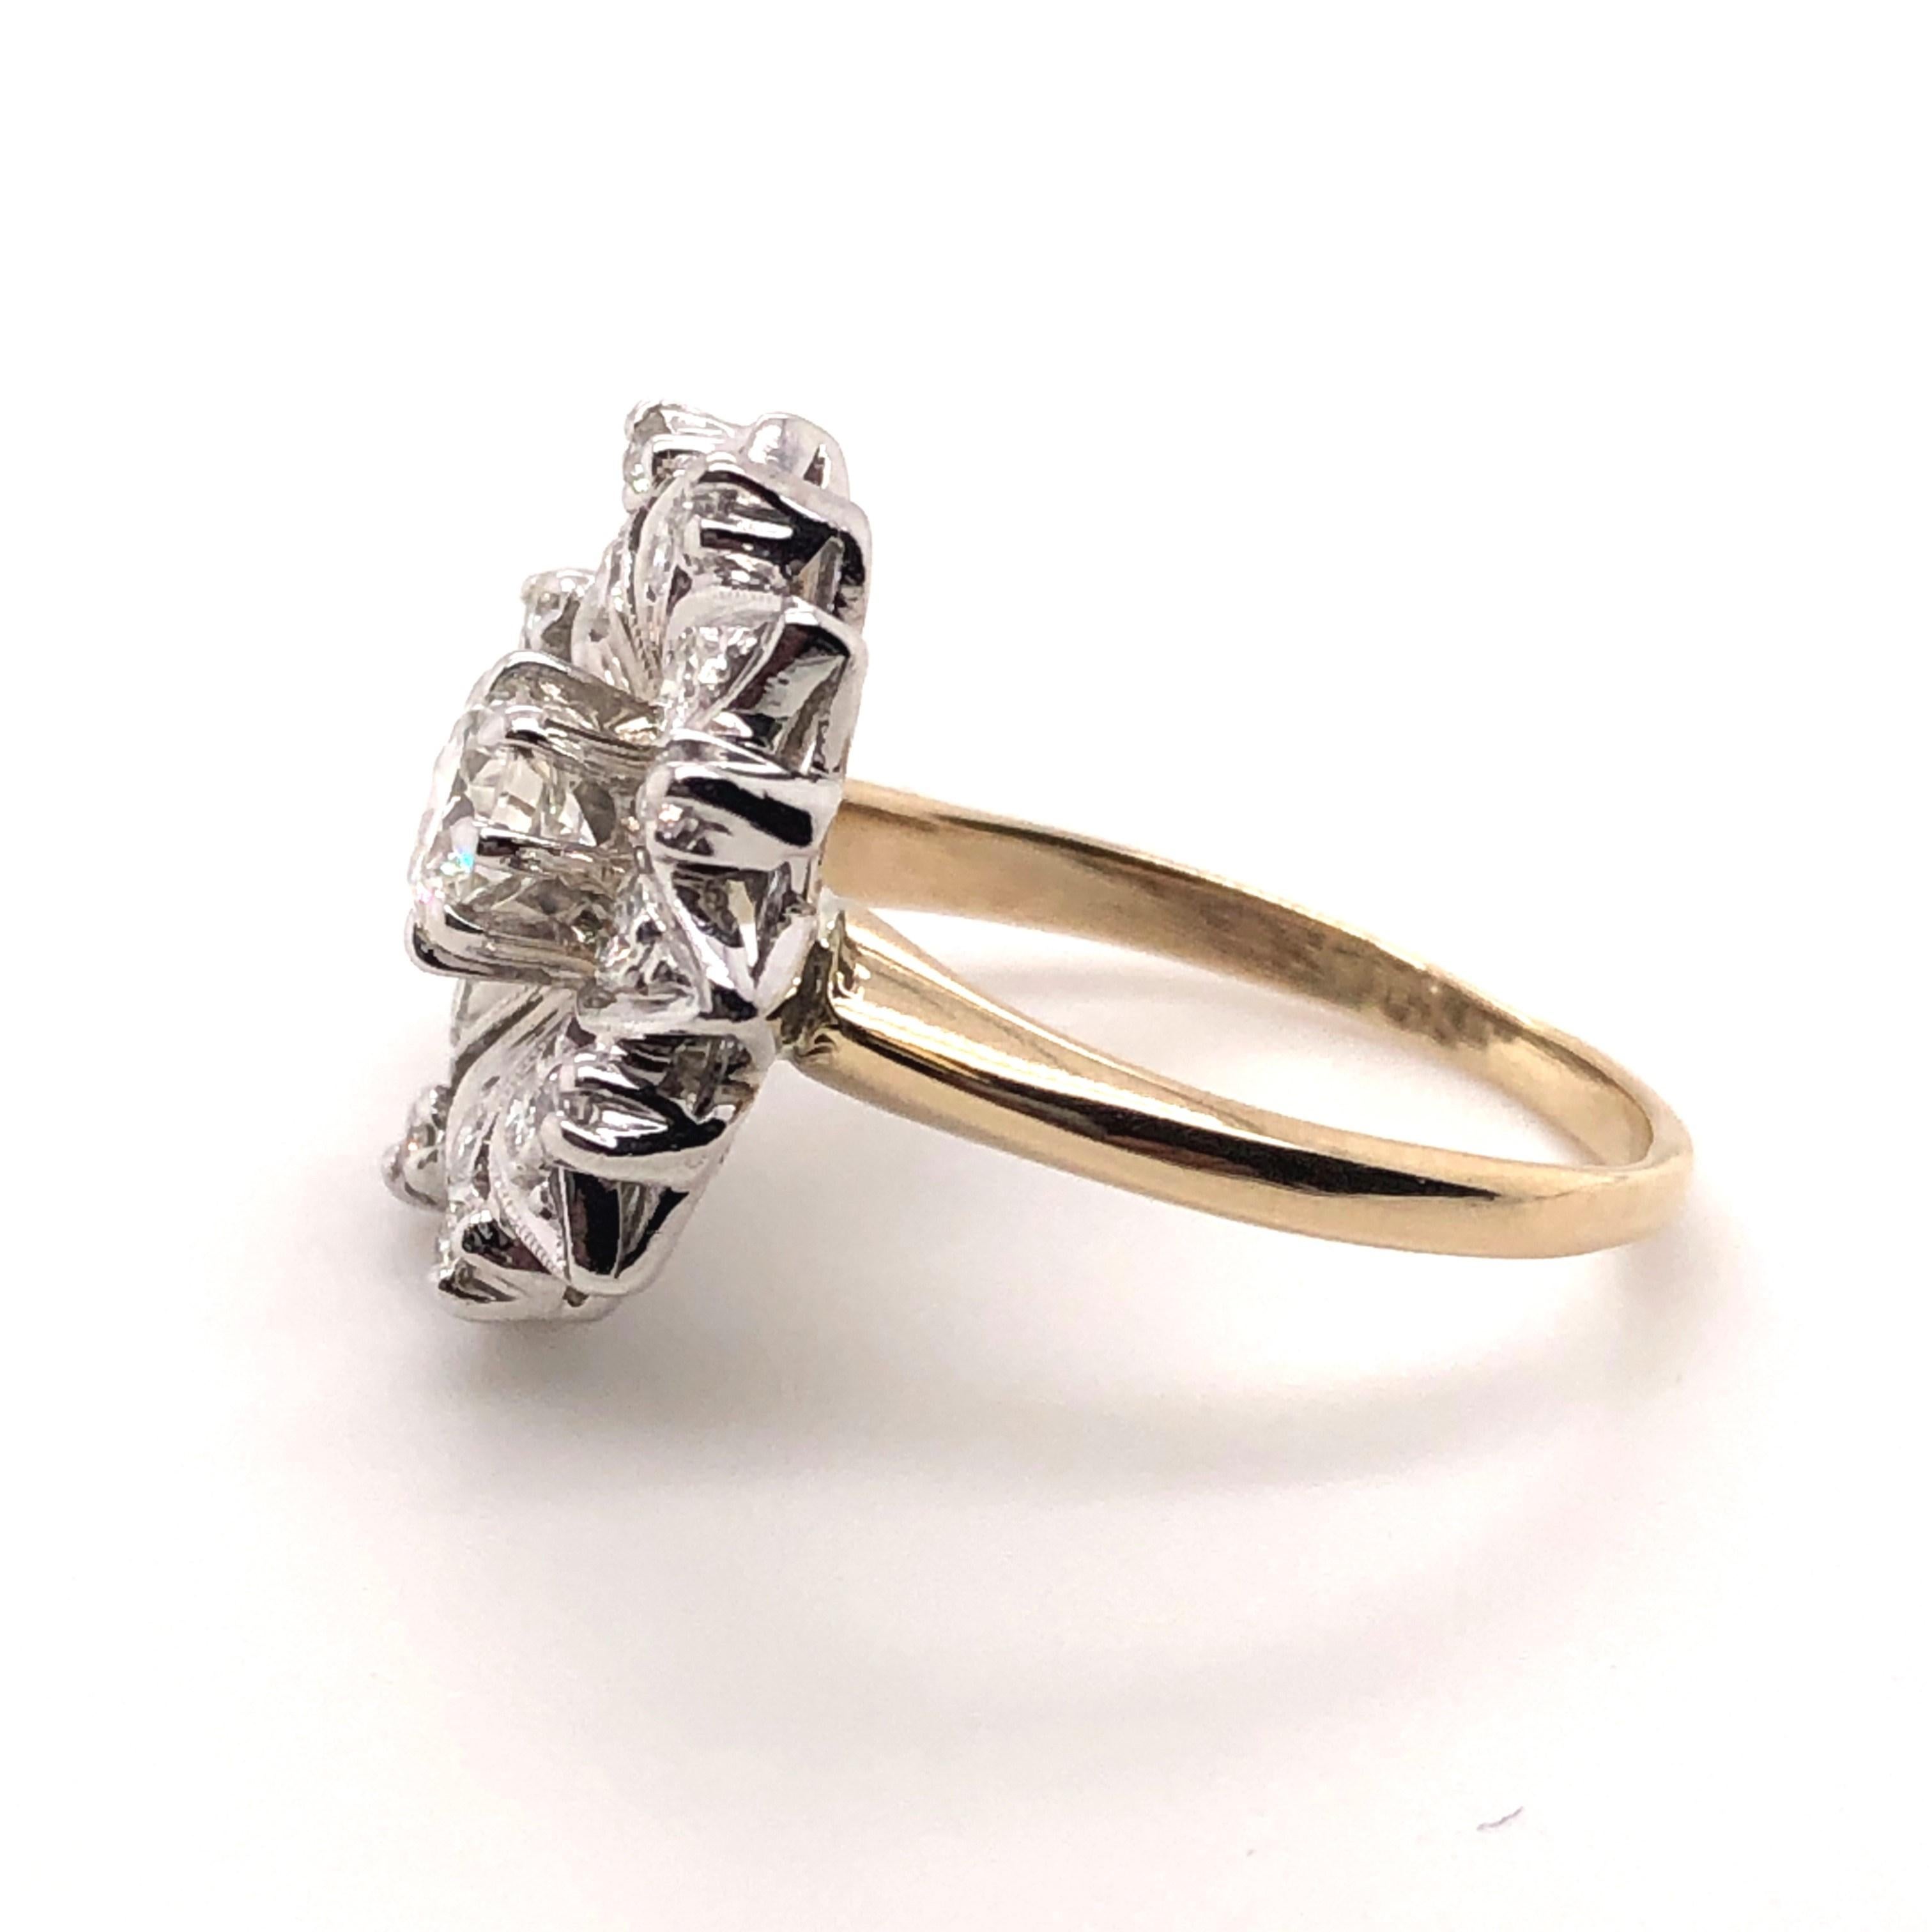 In the 1950's, the would went through a Victorian Revival. This ring is fashioned in a style made to look like similar rings from the Victorian era. This ring is crafted in white gold where the diamonds are set and a yellow gold band. The center